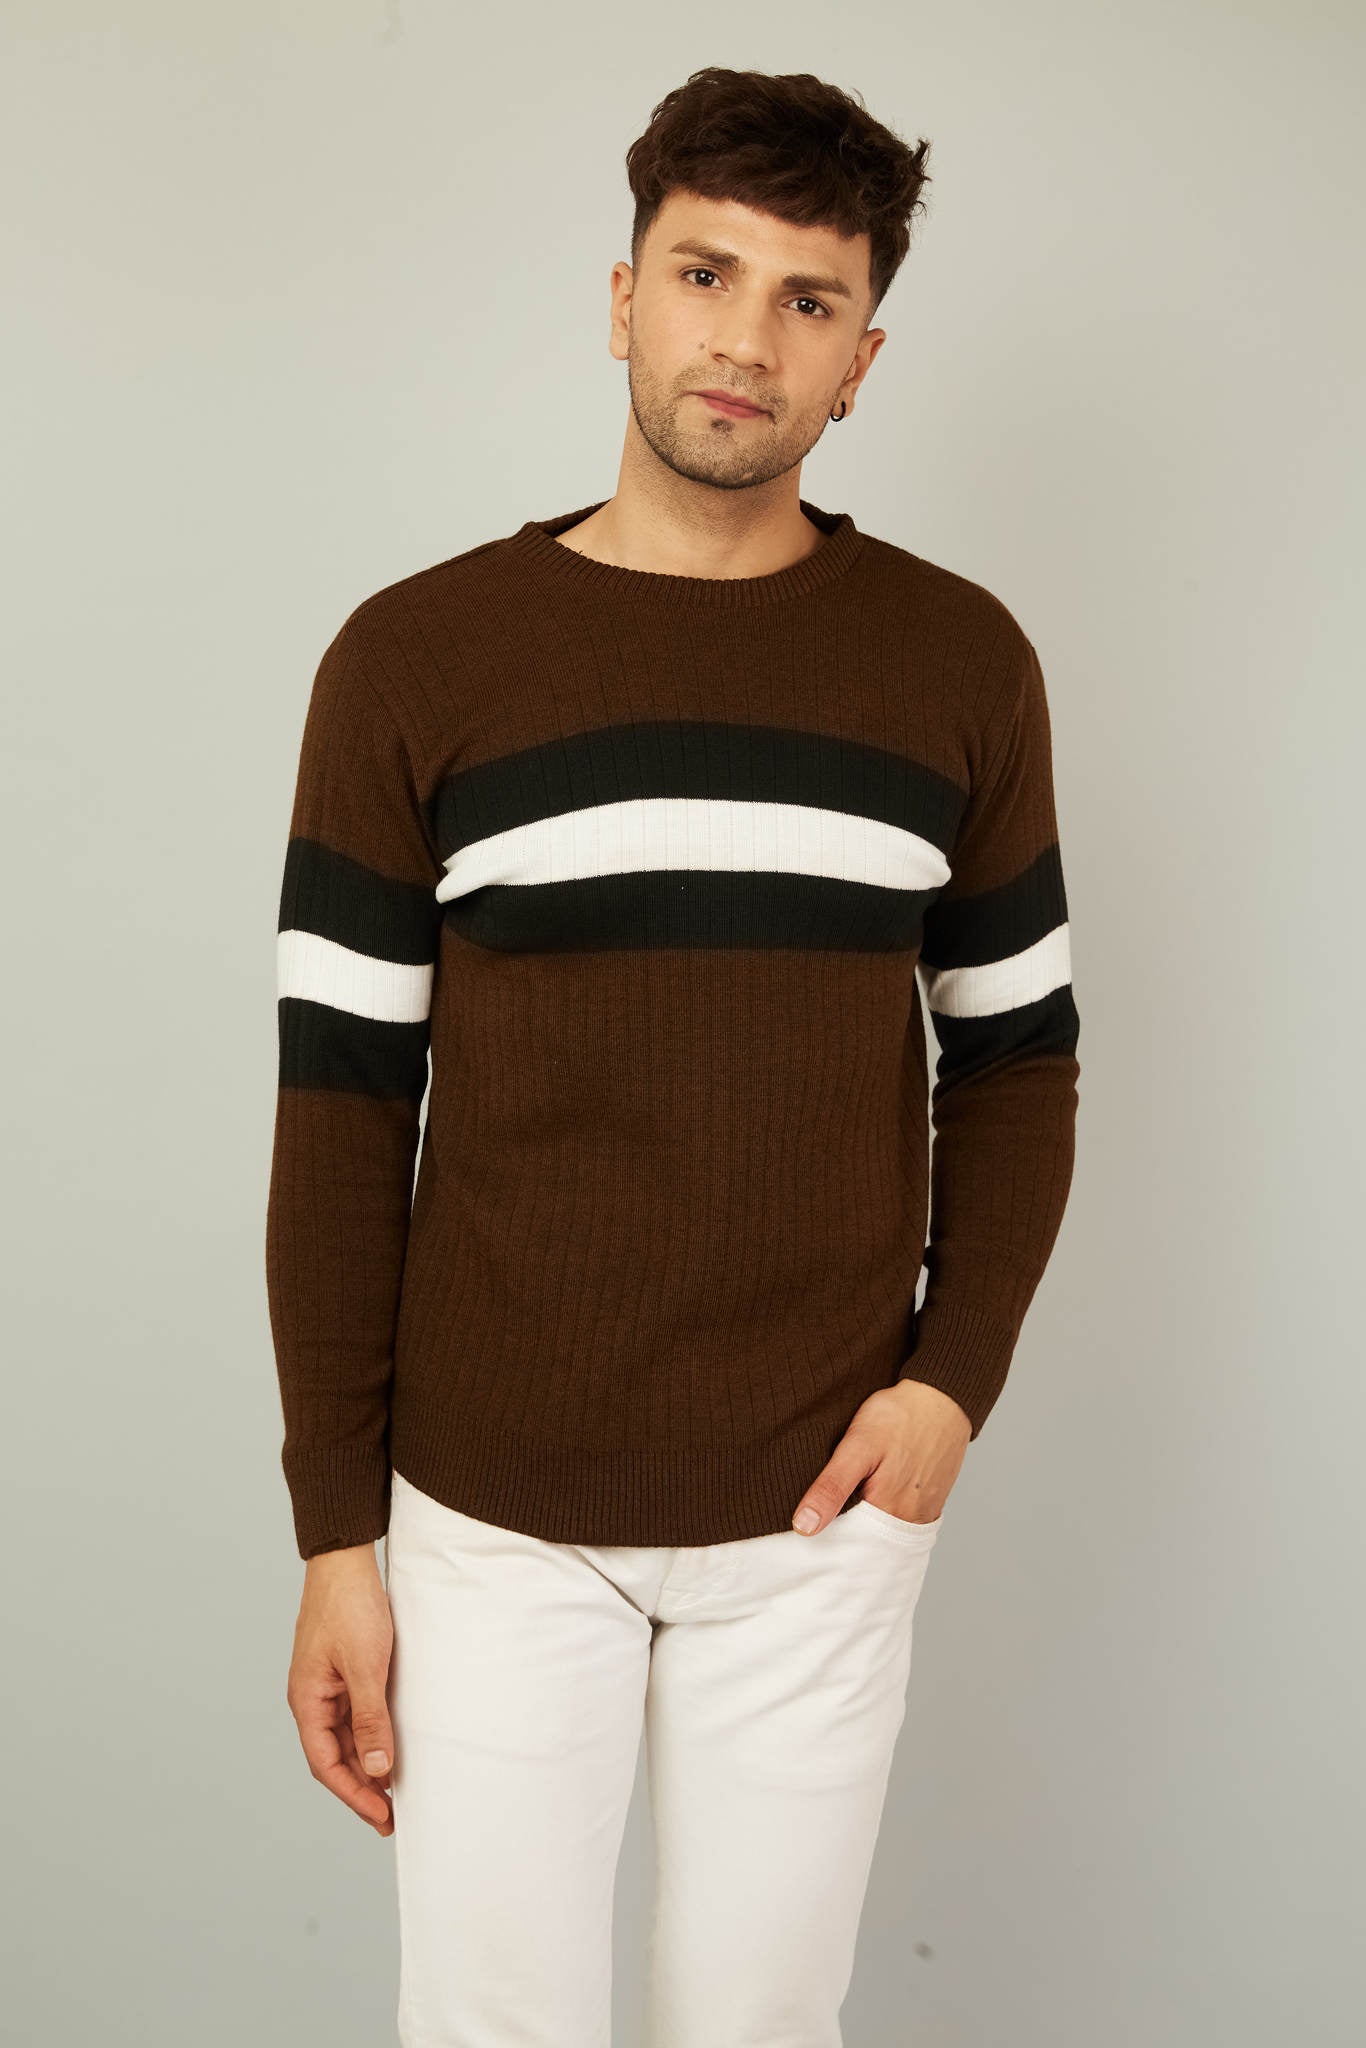 SOOTOP Men'S Casual Striped Men'S Sweater Pullover Color Round